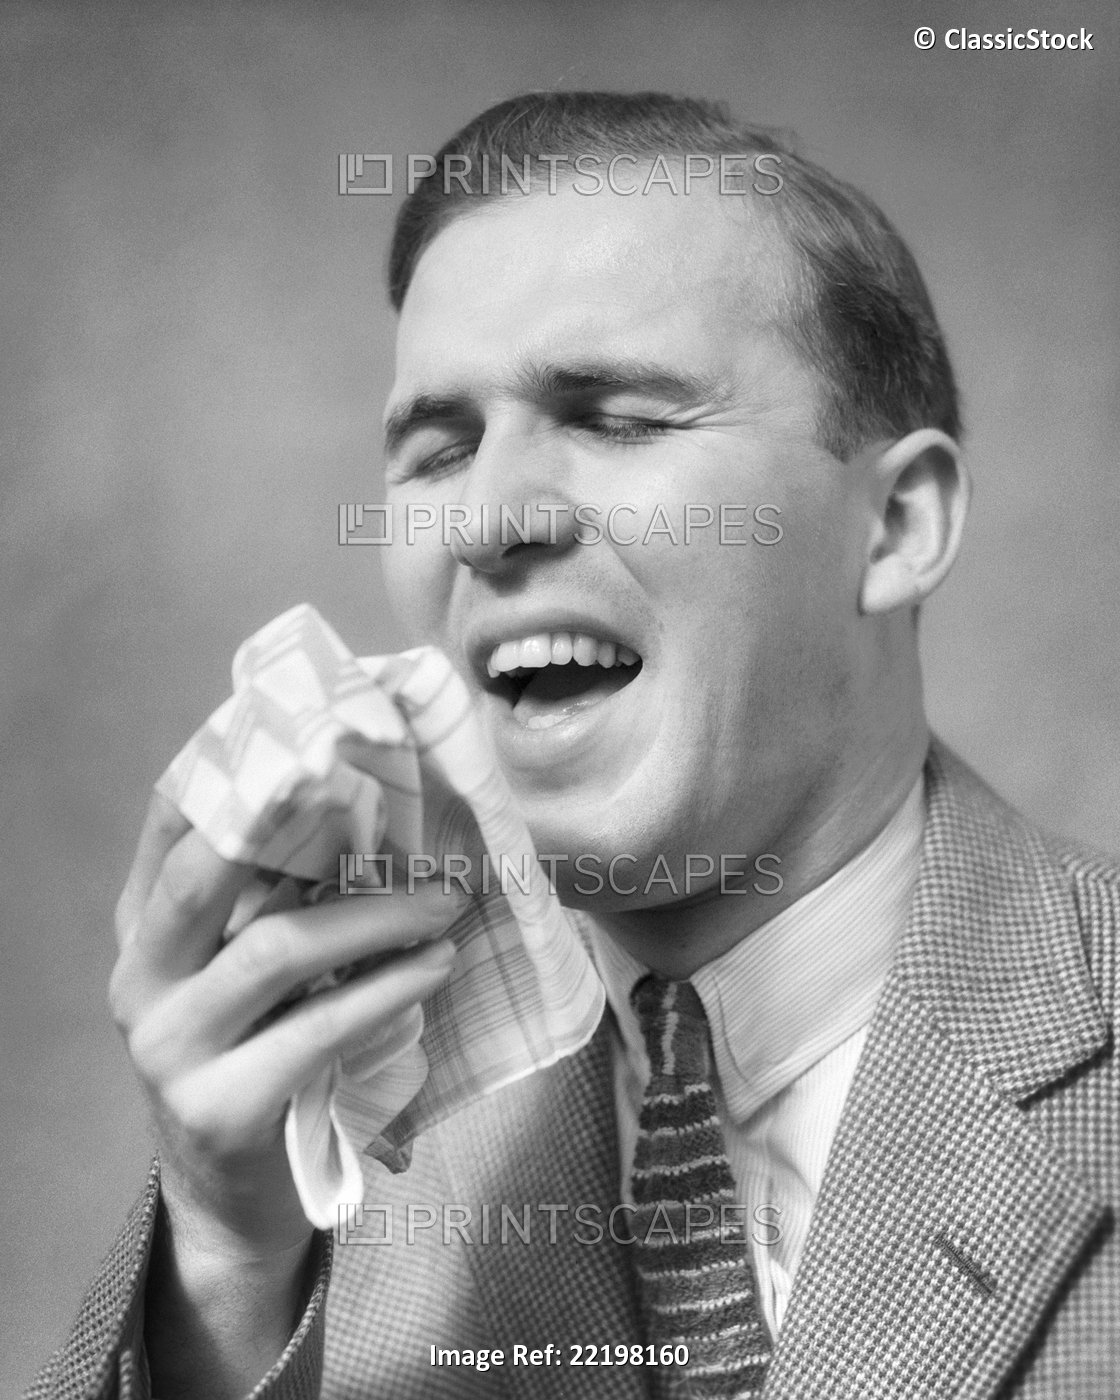 1930s MAN EYES CLOSED MOUTH OPEN HANDKERCHIEF IN HAND ABOUT TO SNEEZE